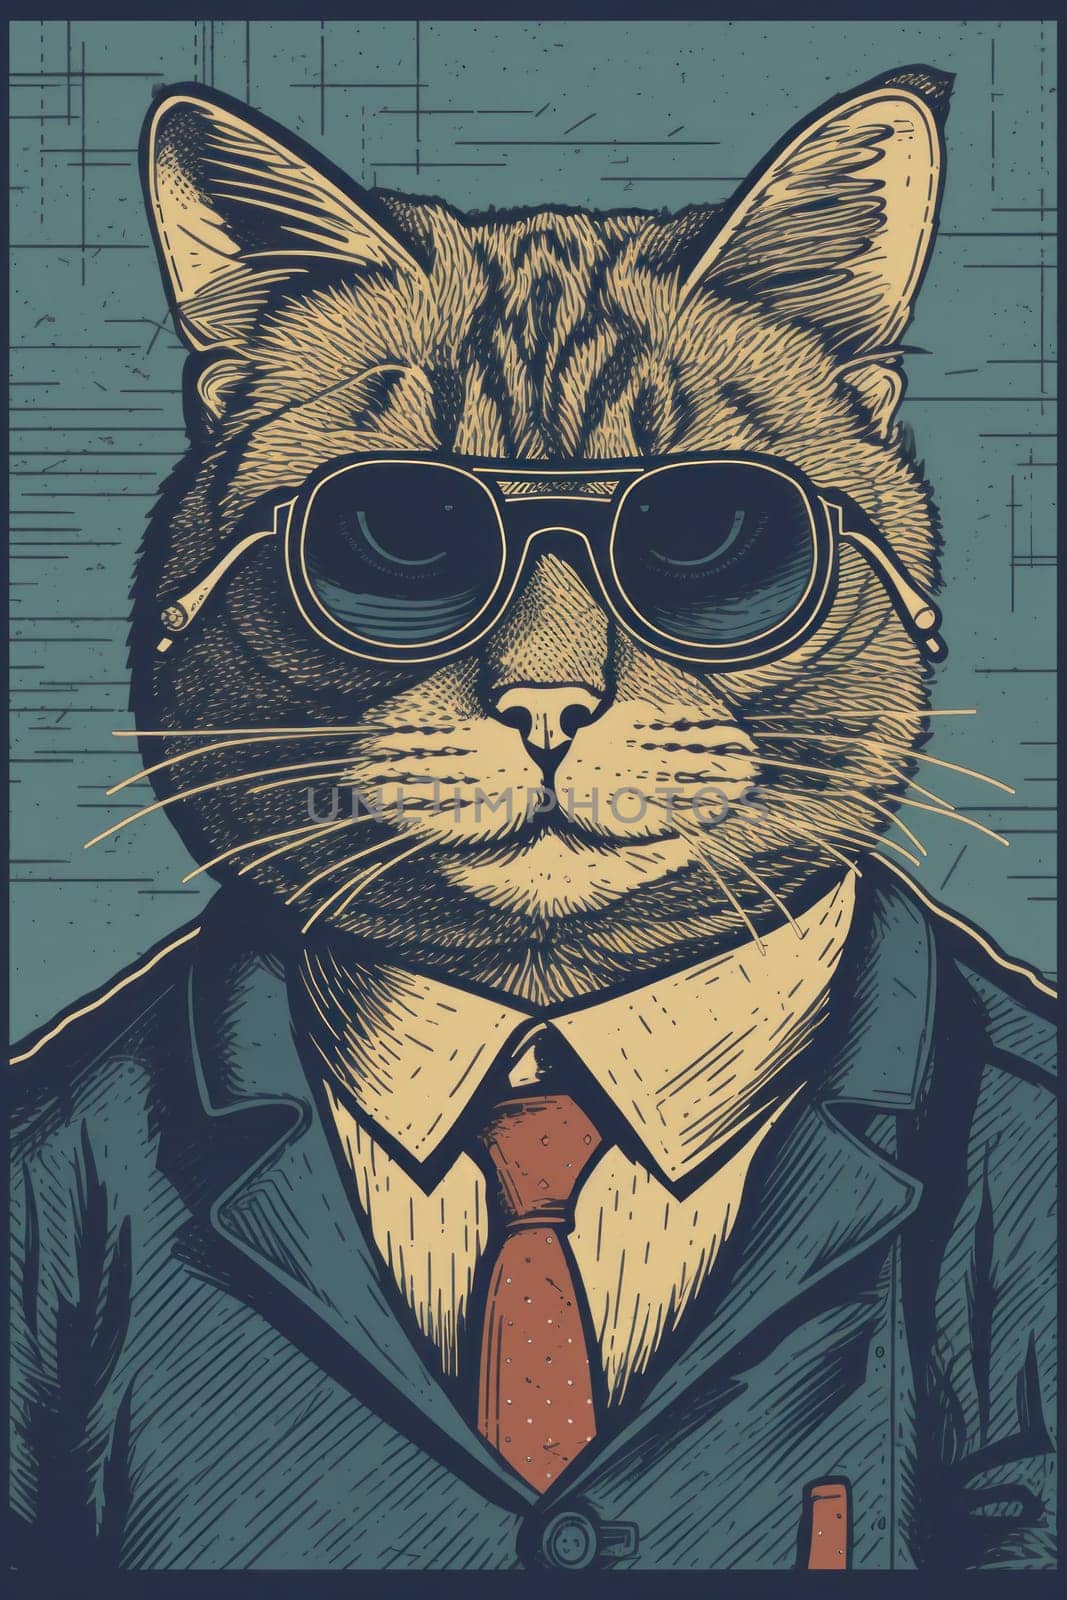 A cat wearing glasses and a suit with a tie, AI by starush